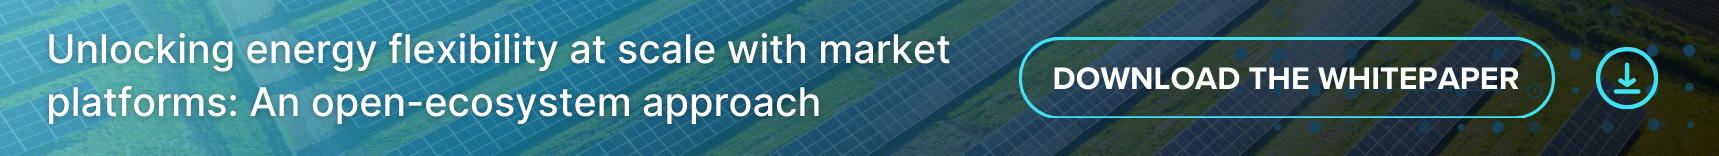 Banner for the whitepaper: Unlocking energy flexibility at scale with market platforms: An open-ecosystem approach